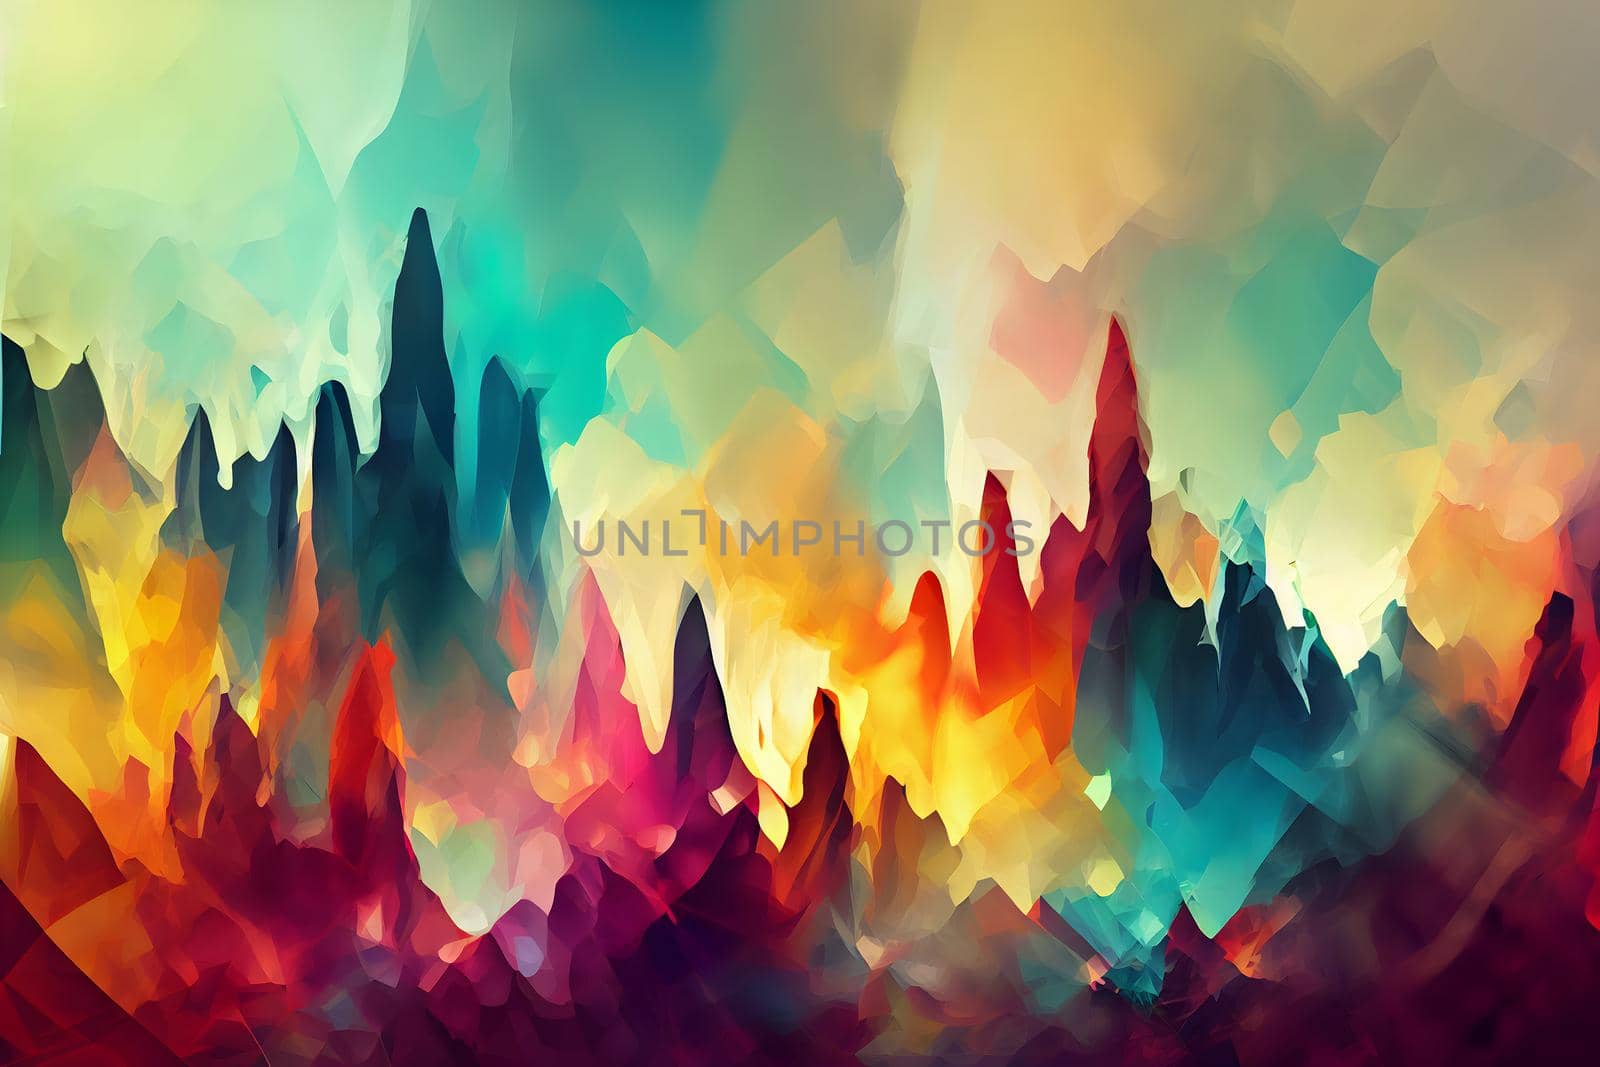 abstract flat background with colorful painted spikes, neural network generated art by z1b